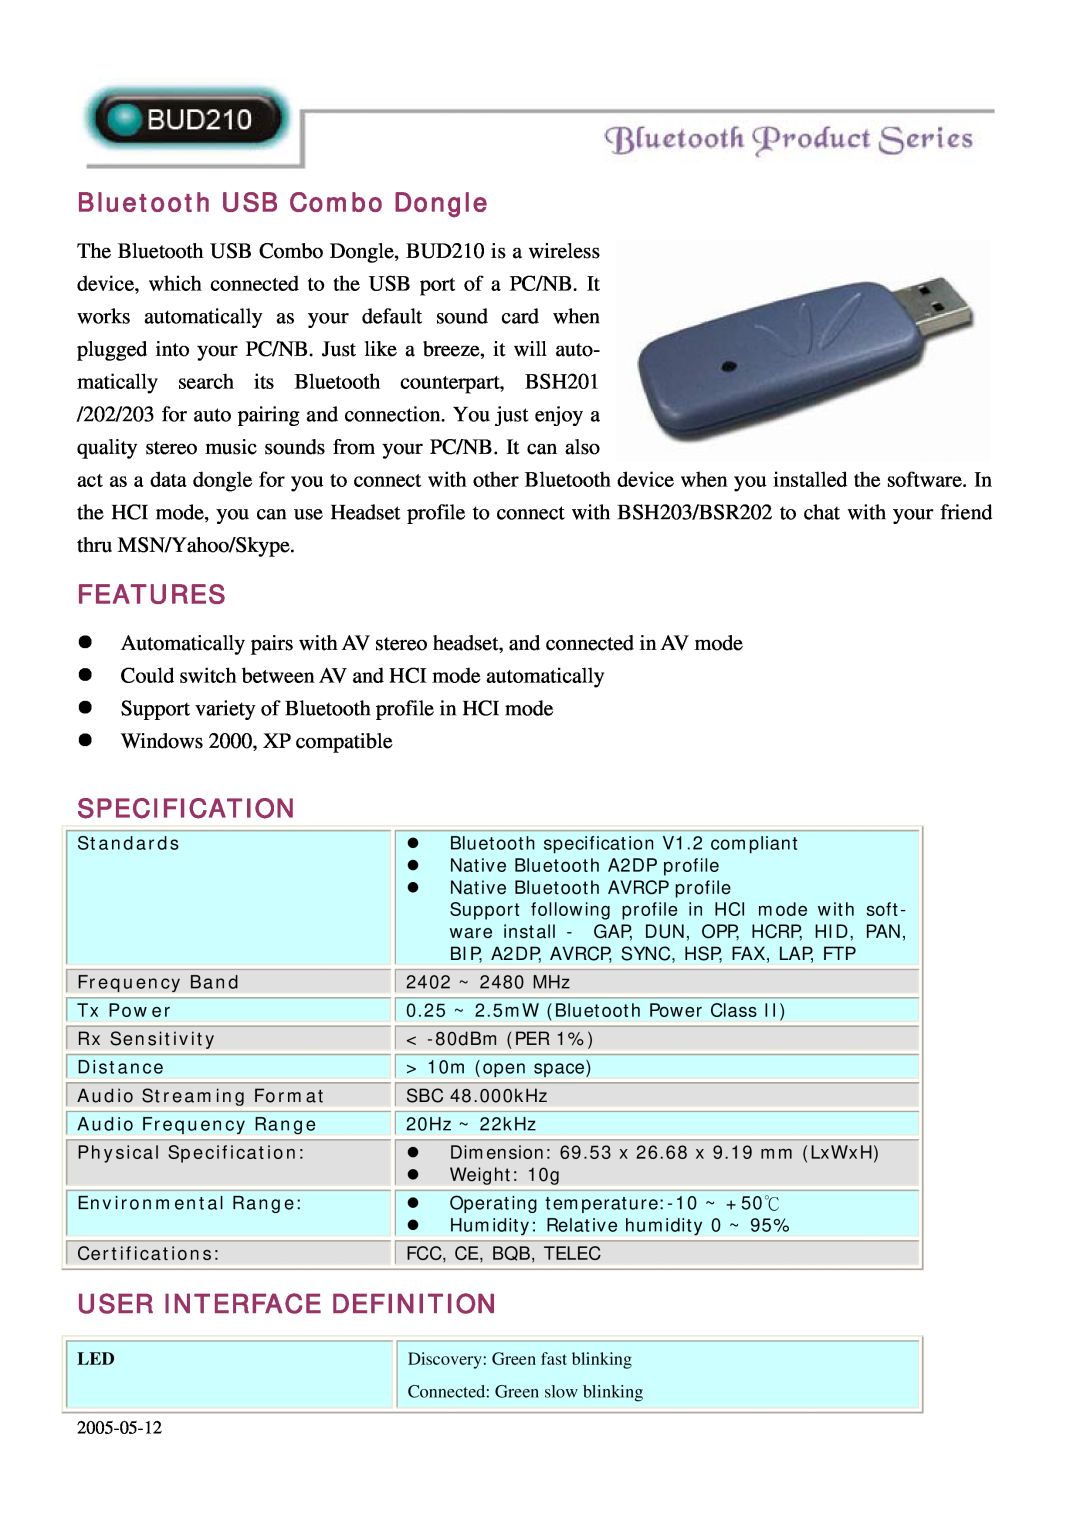 Abocom BUD210 specifications Bluetooth USB Combo Dongle, Features, Specification, User Interface Definition 